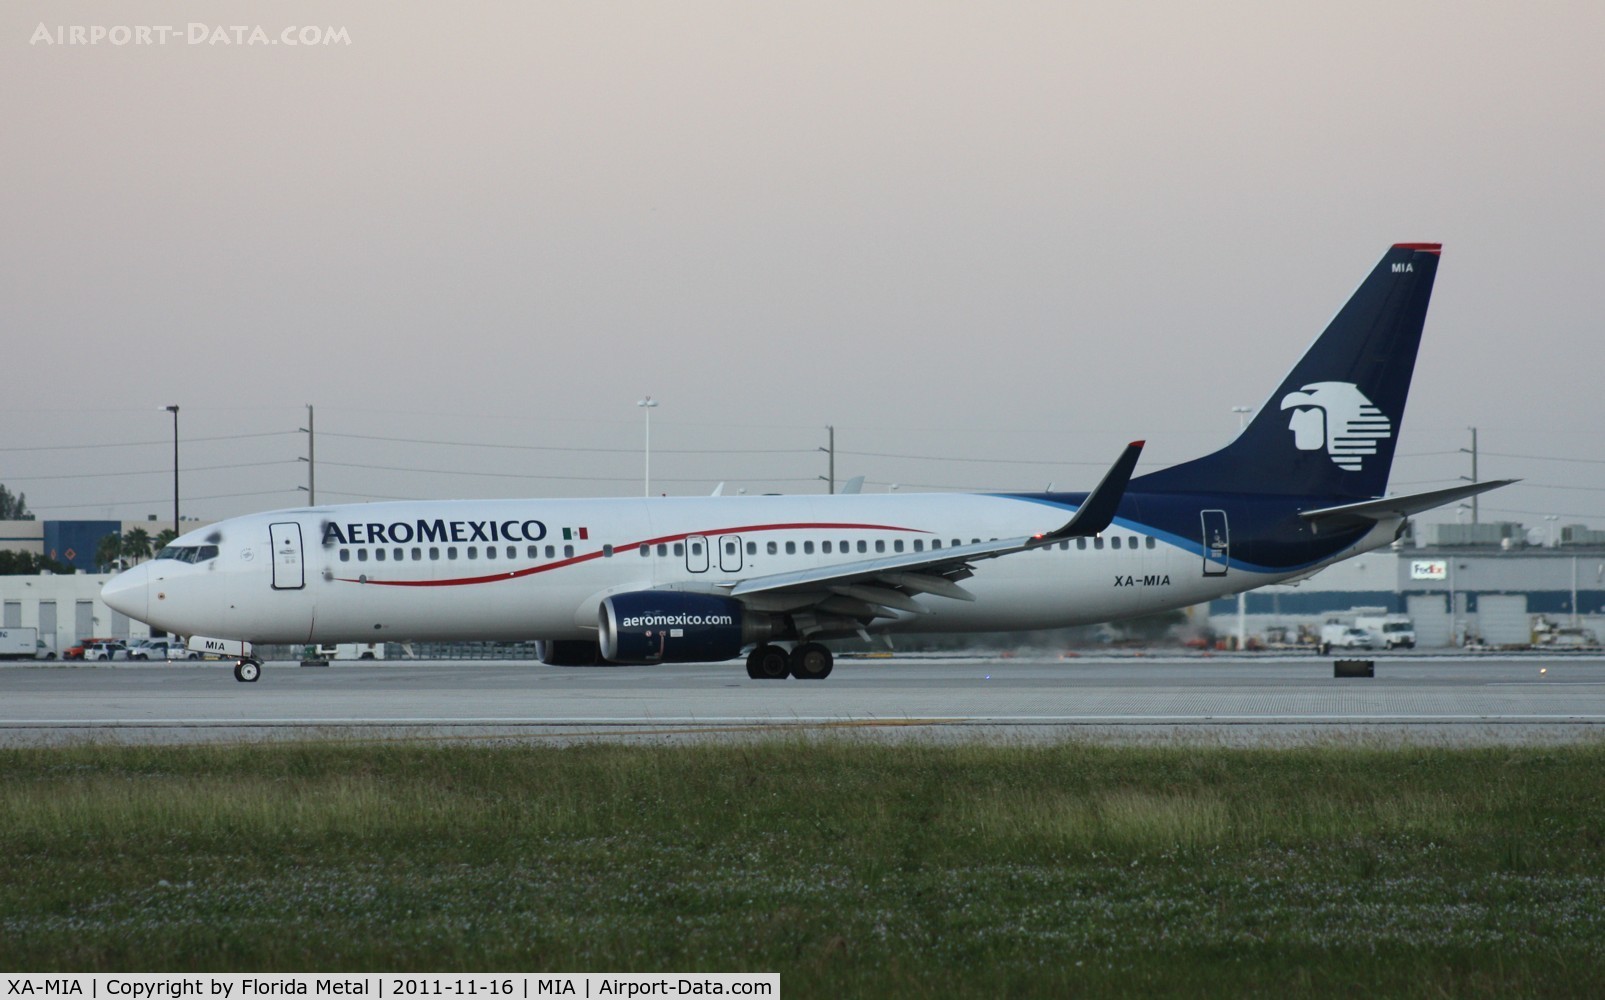 XA-MIA, 2007 Boeing 737-852 C/N 35119, Been flying since 2007, surprisingly no one had a pic of it yet.